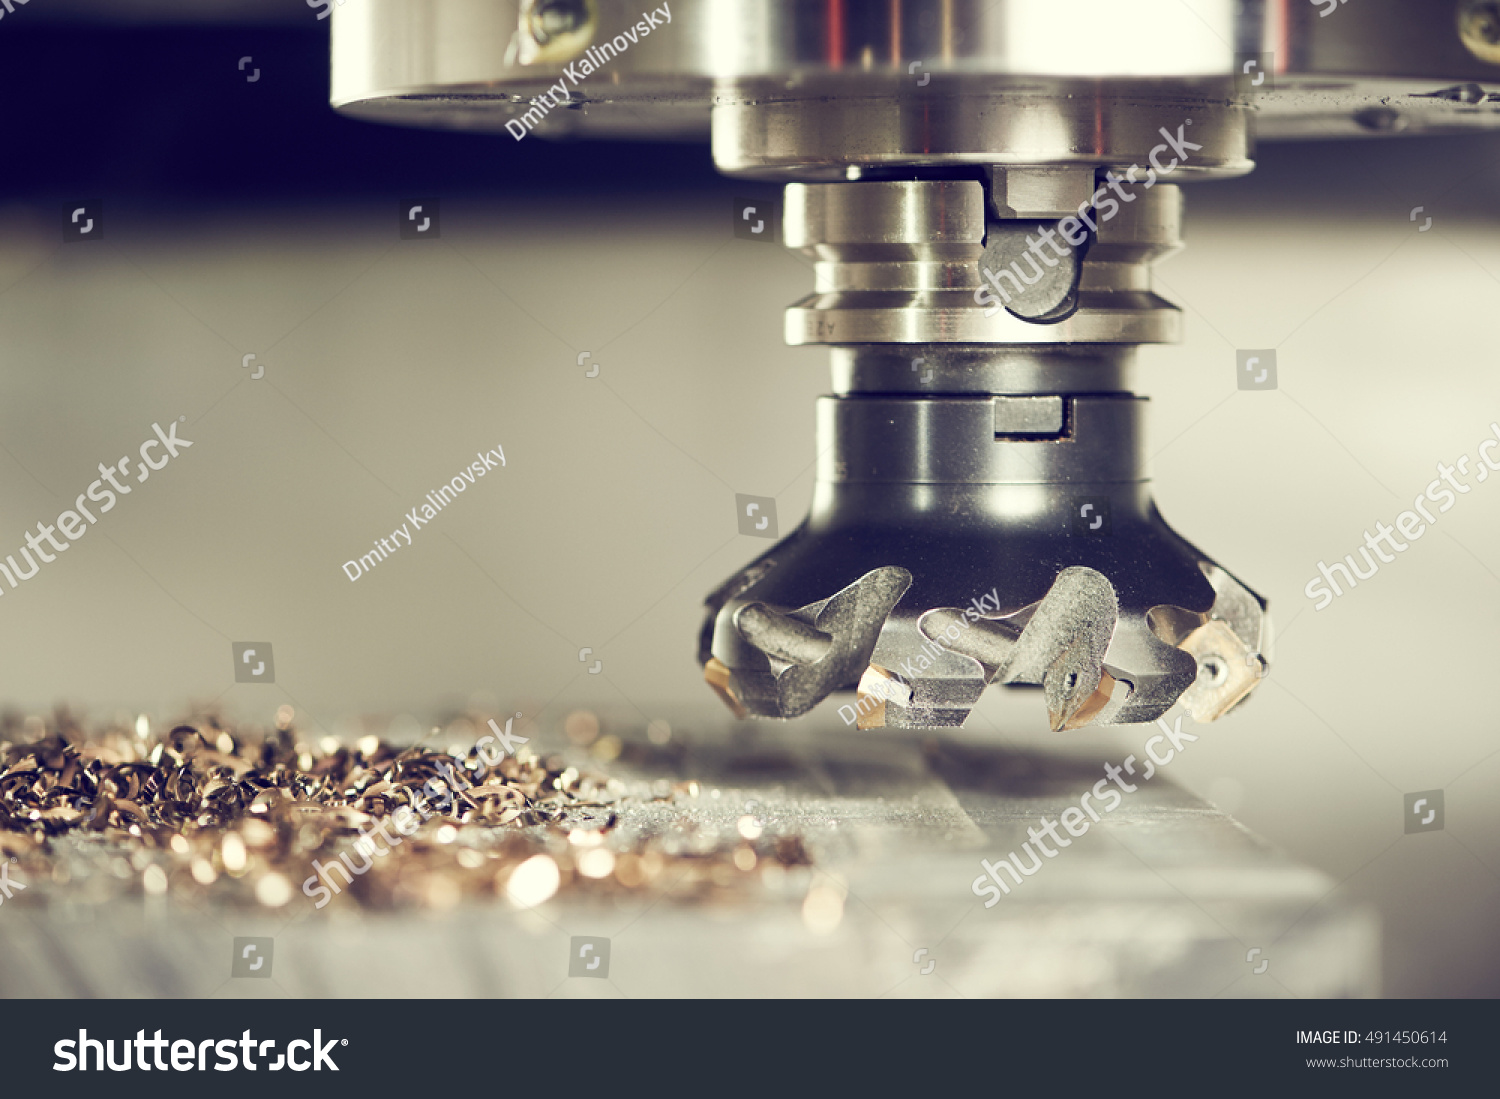 industrial metalworking cutting process by milling cutter #491450614